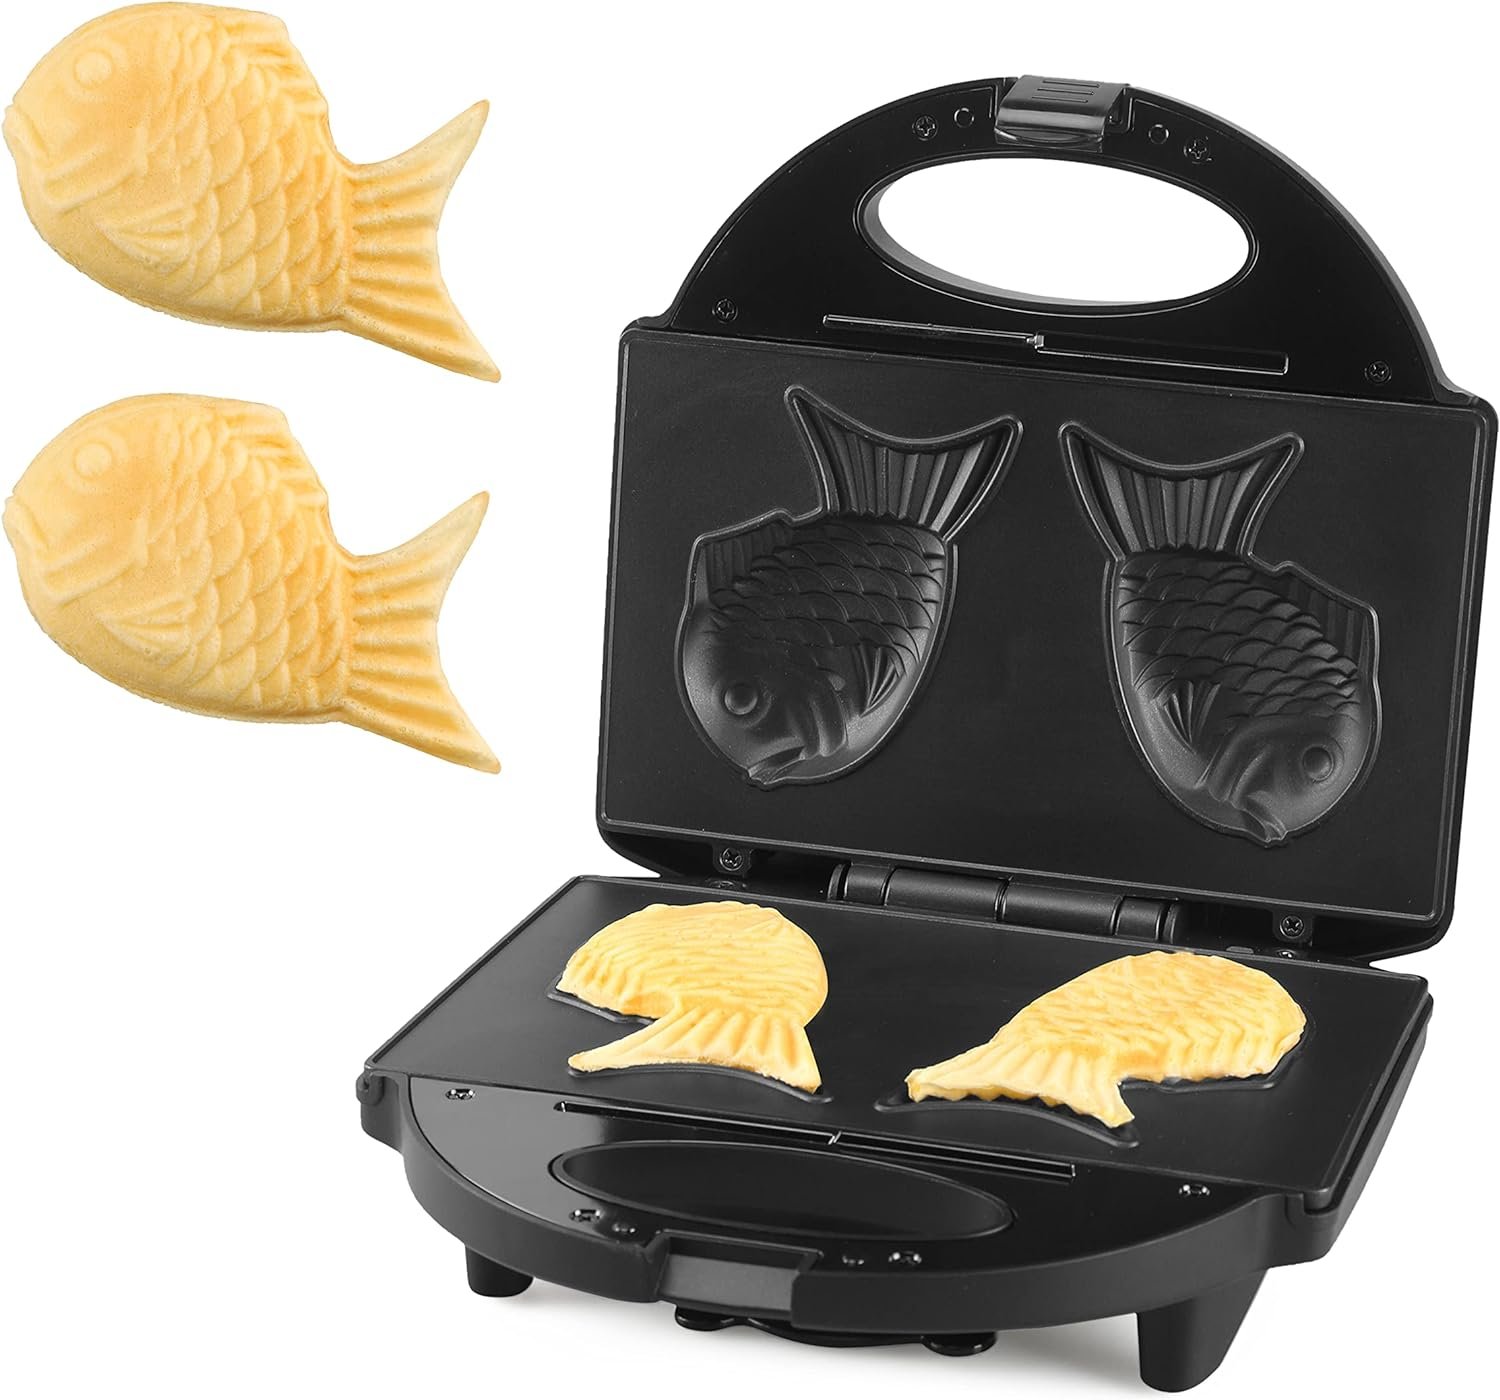 FineMade Taiyaki Fish Waffle Maker Machine with Non Stick Cooking Plate, Electric Japanese Fish Shaped Waffle Iron Pan, Korean Bungeoppang Pan, Recipe Included